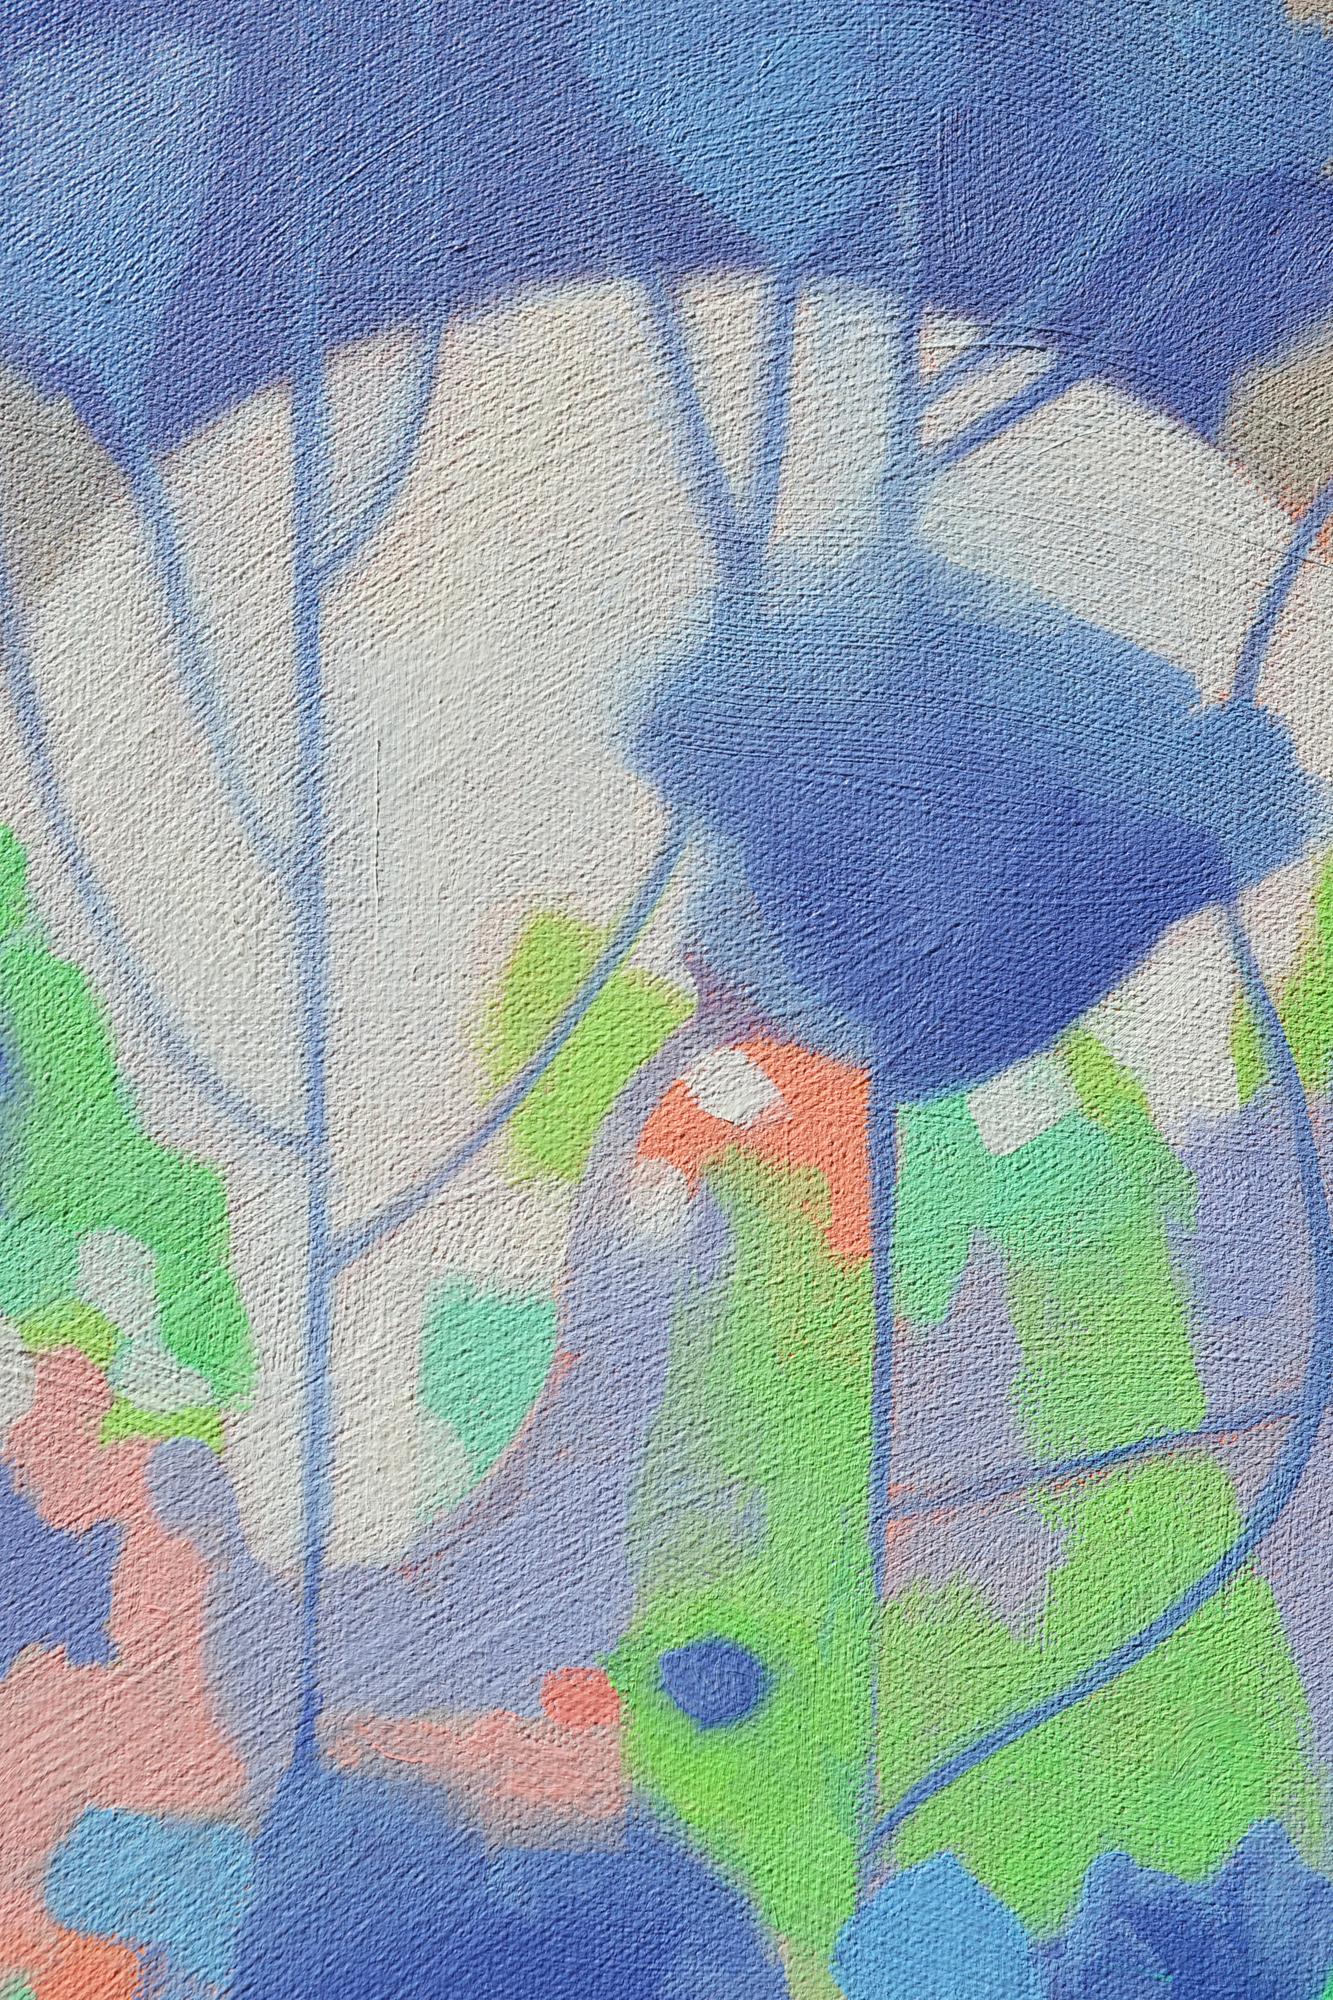 Blue Poppies - Abstract Painting by Natalie George